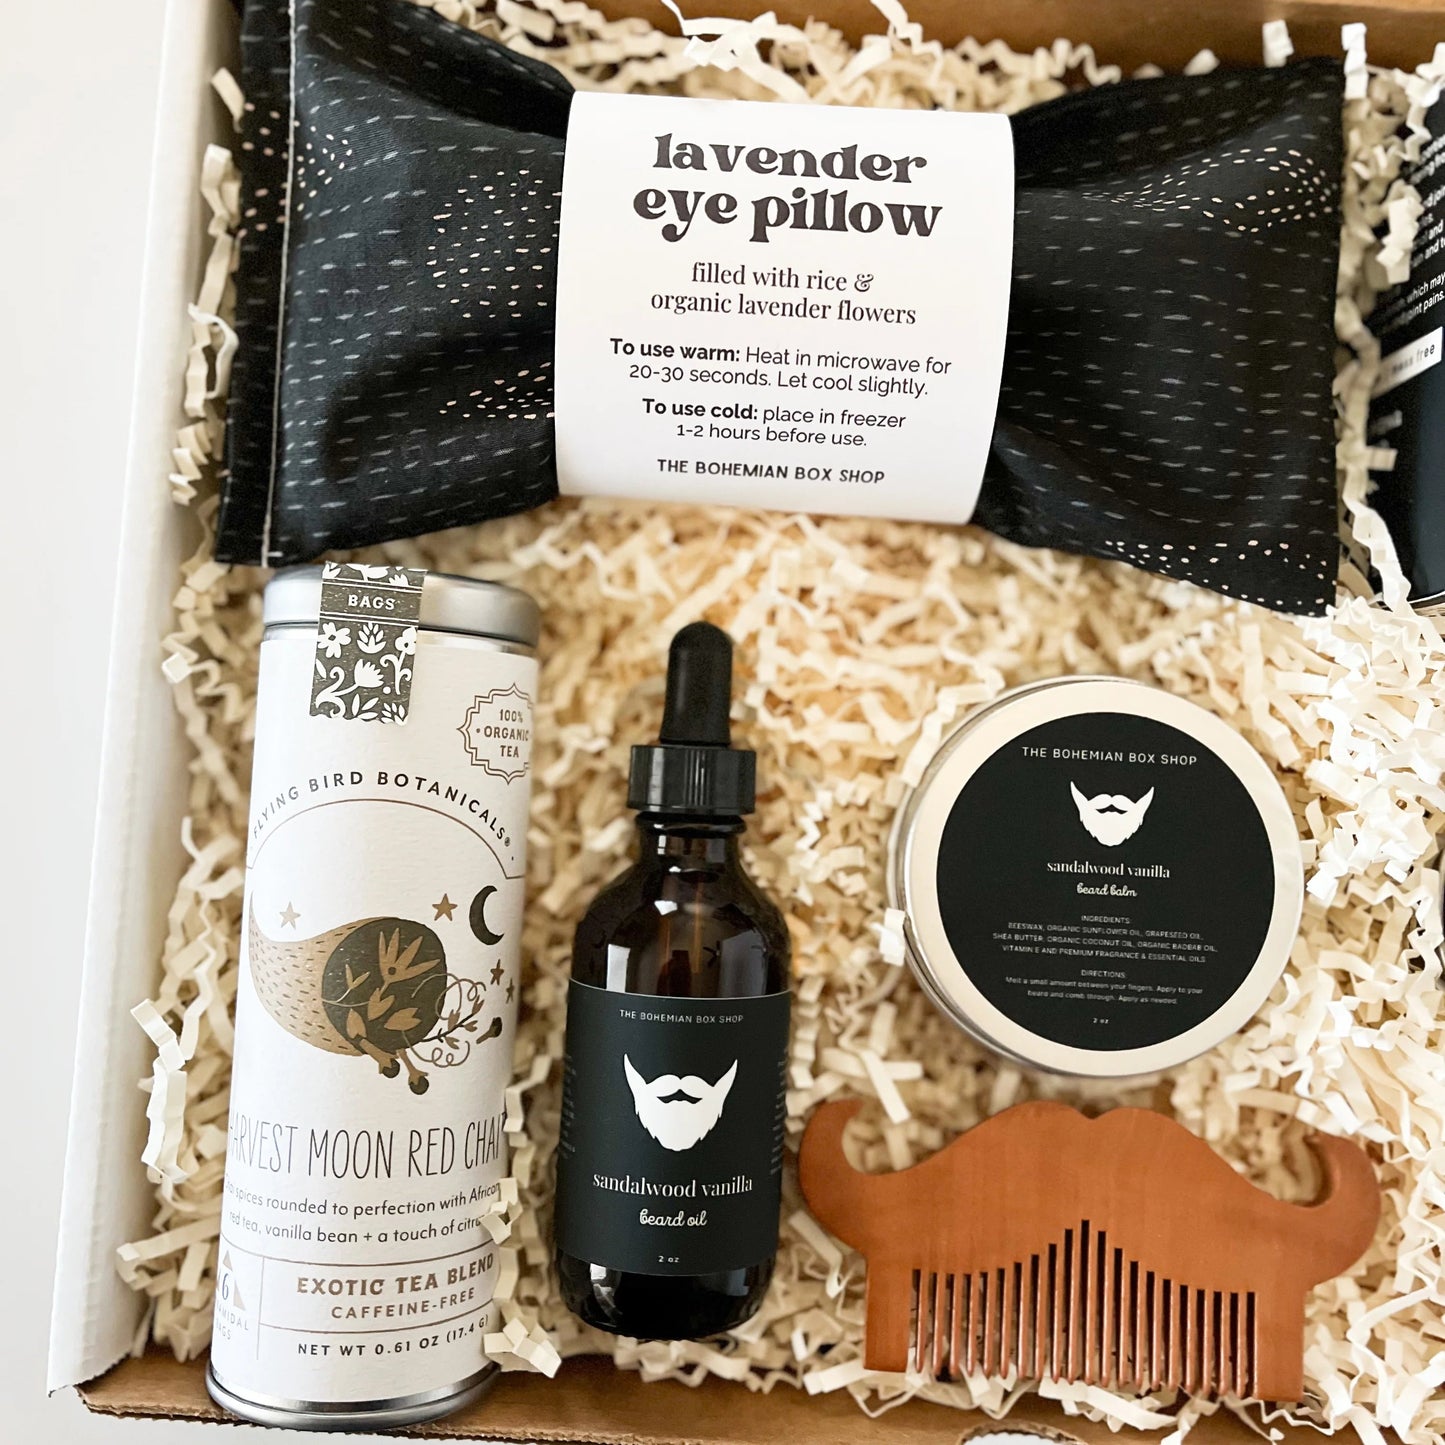 Black & White Men’s Curated Gift Box. Includes lavender eye pillow, bath bomb, harvest moon red chai tea, beard care kit, around the bonfire soy candle, and moon phases matchbox. 